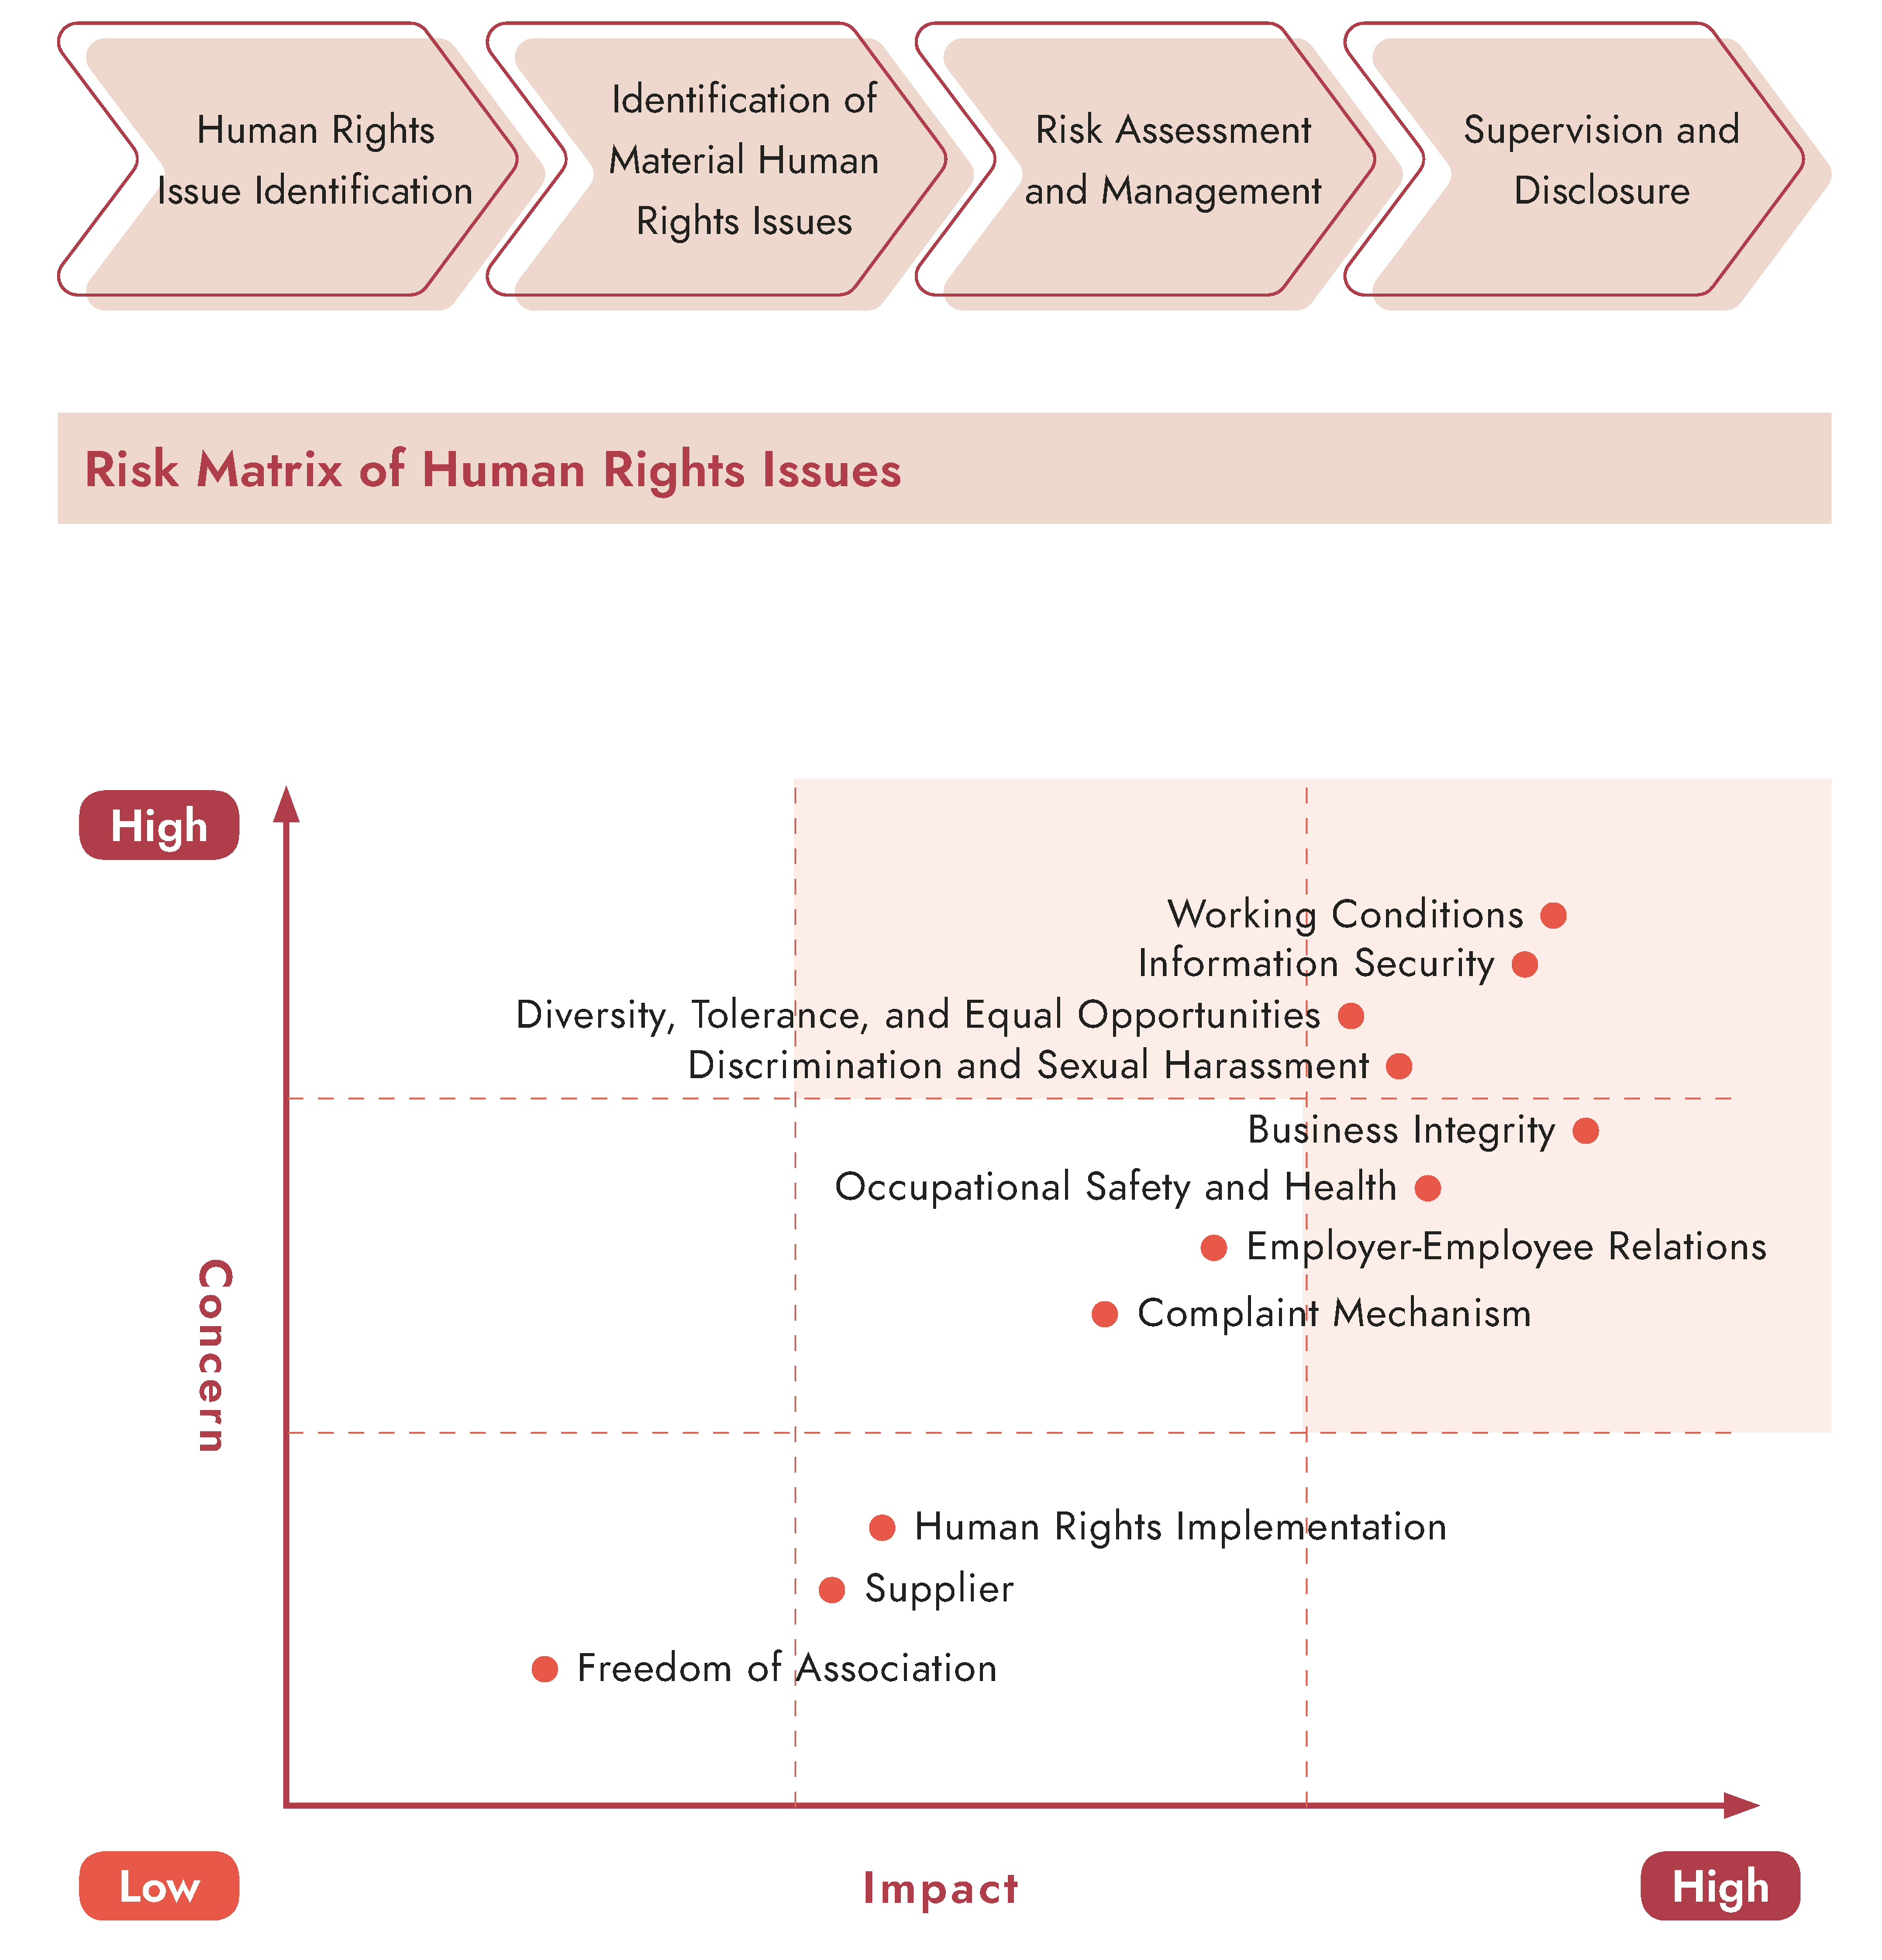 Risk Matrix of Human Rights Issue